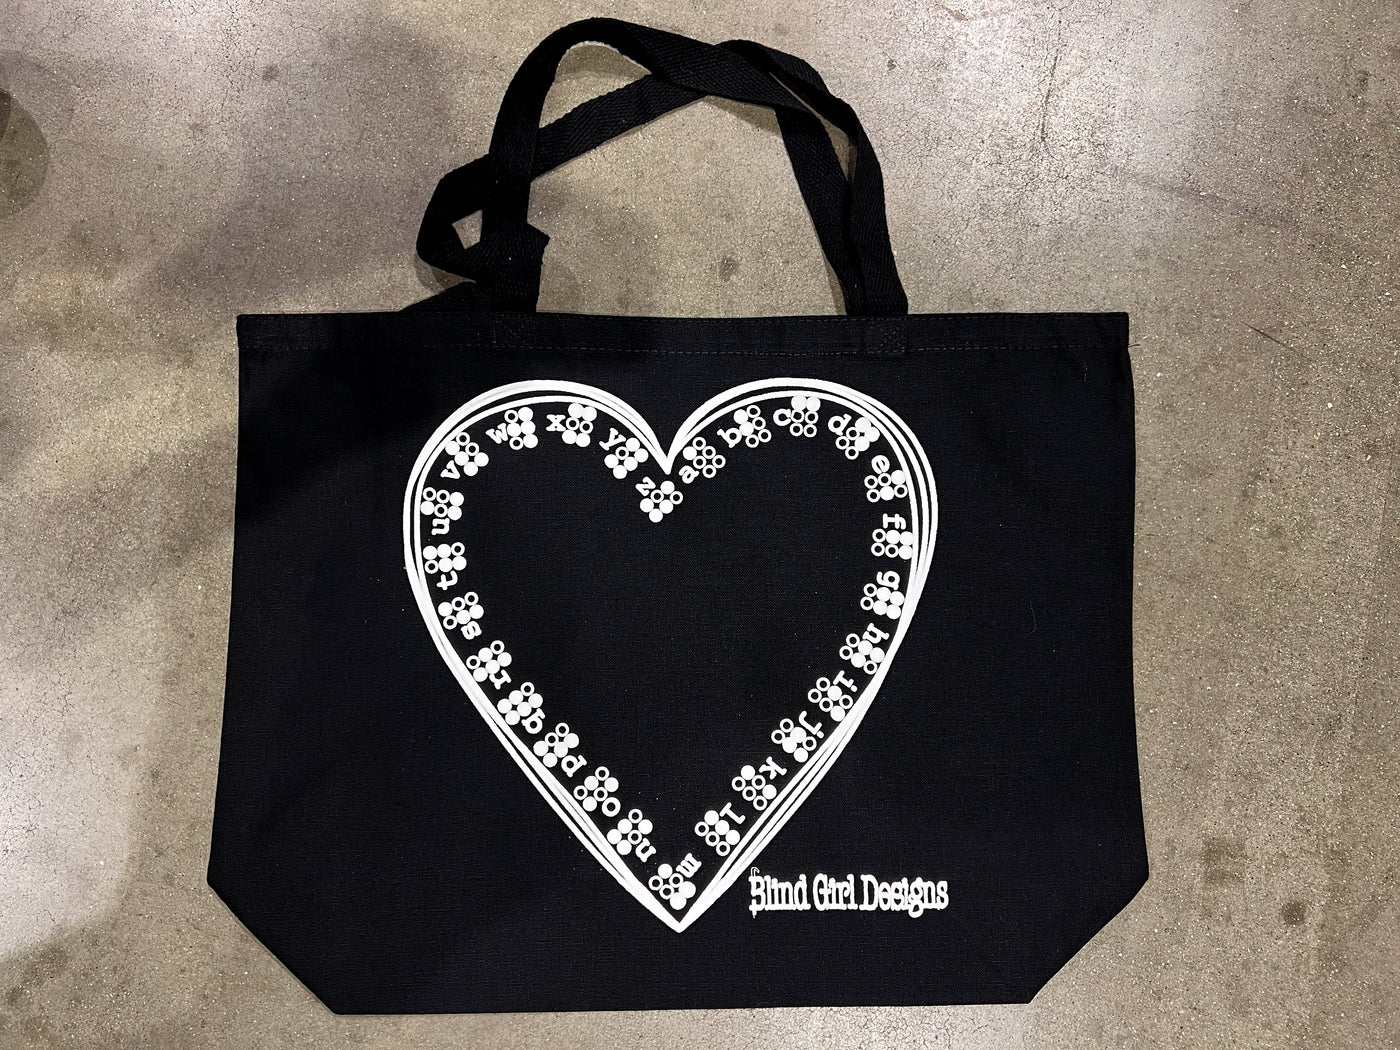 A black canvas tote with the Braille heart print, a hand drawn 12 x 12 heart, inside the perimeter of the heart, starting at the top, is the braille alphabet a through Z with adjacent letters.